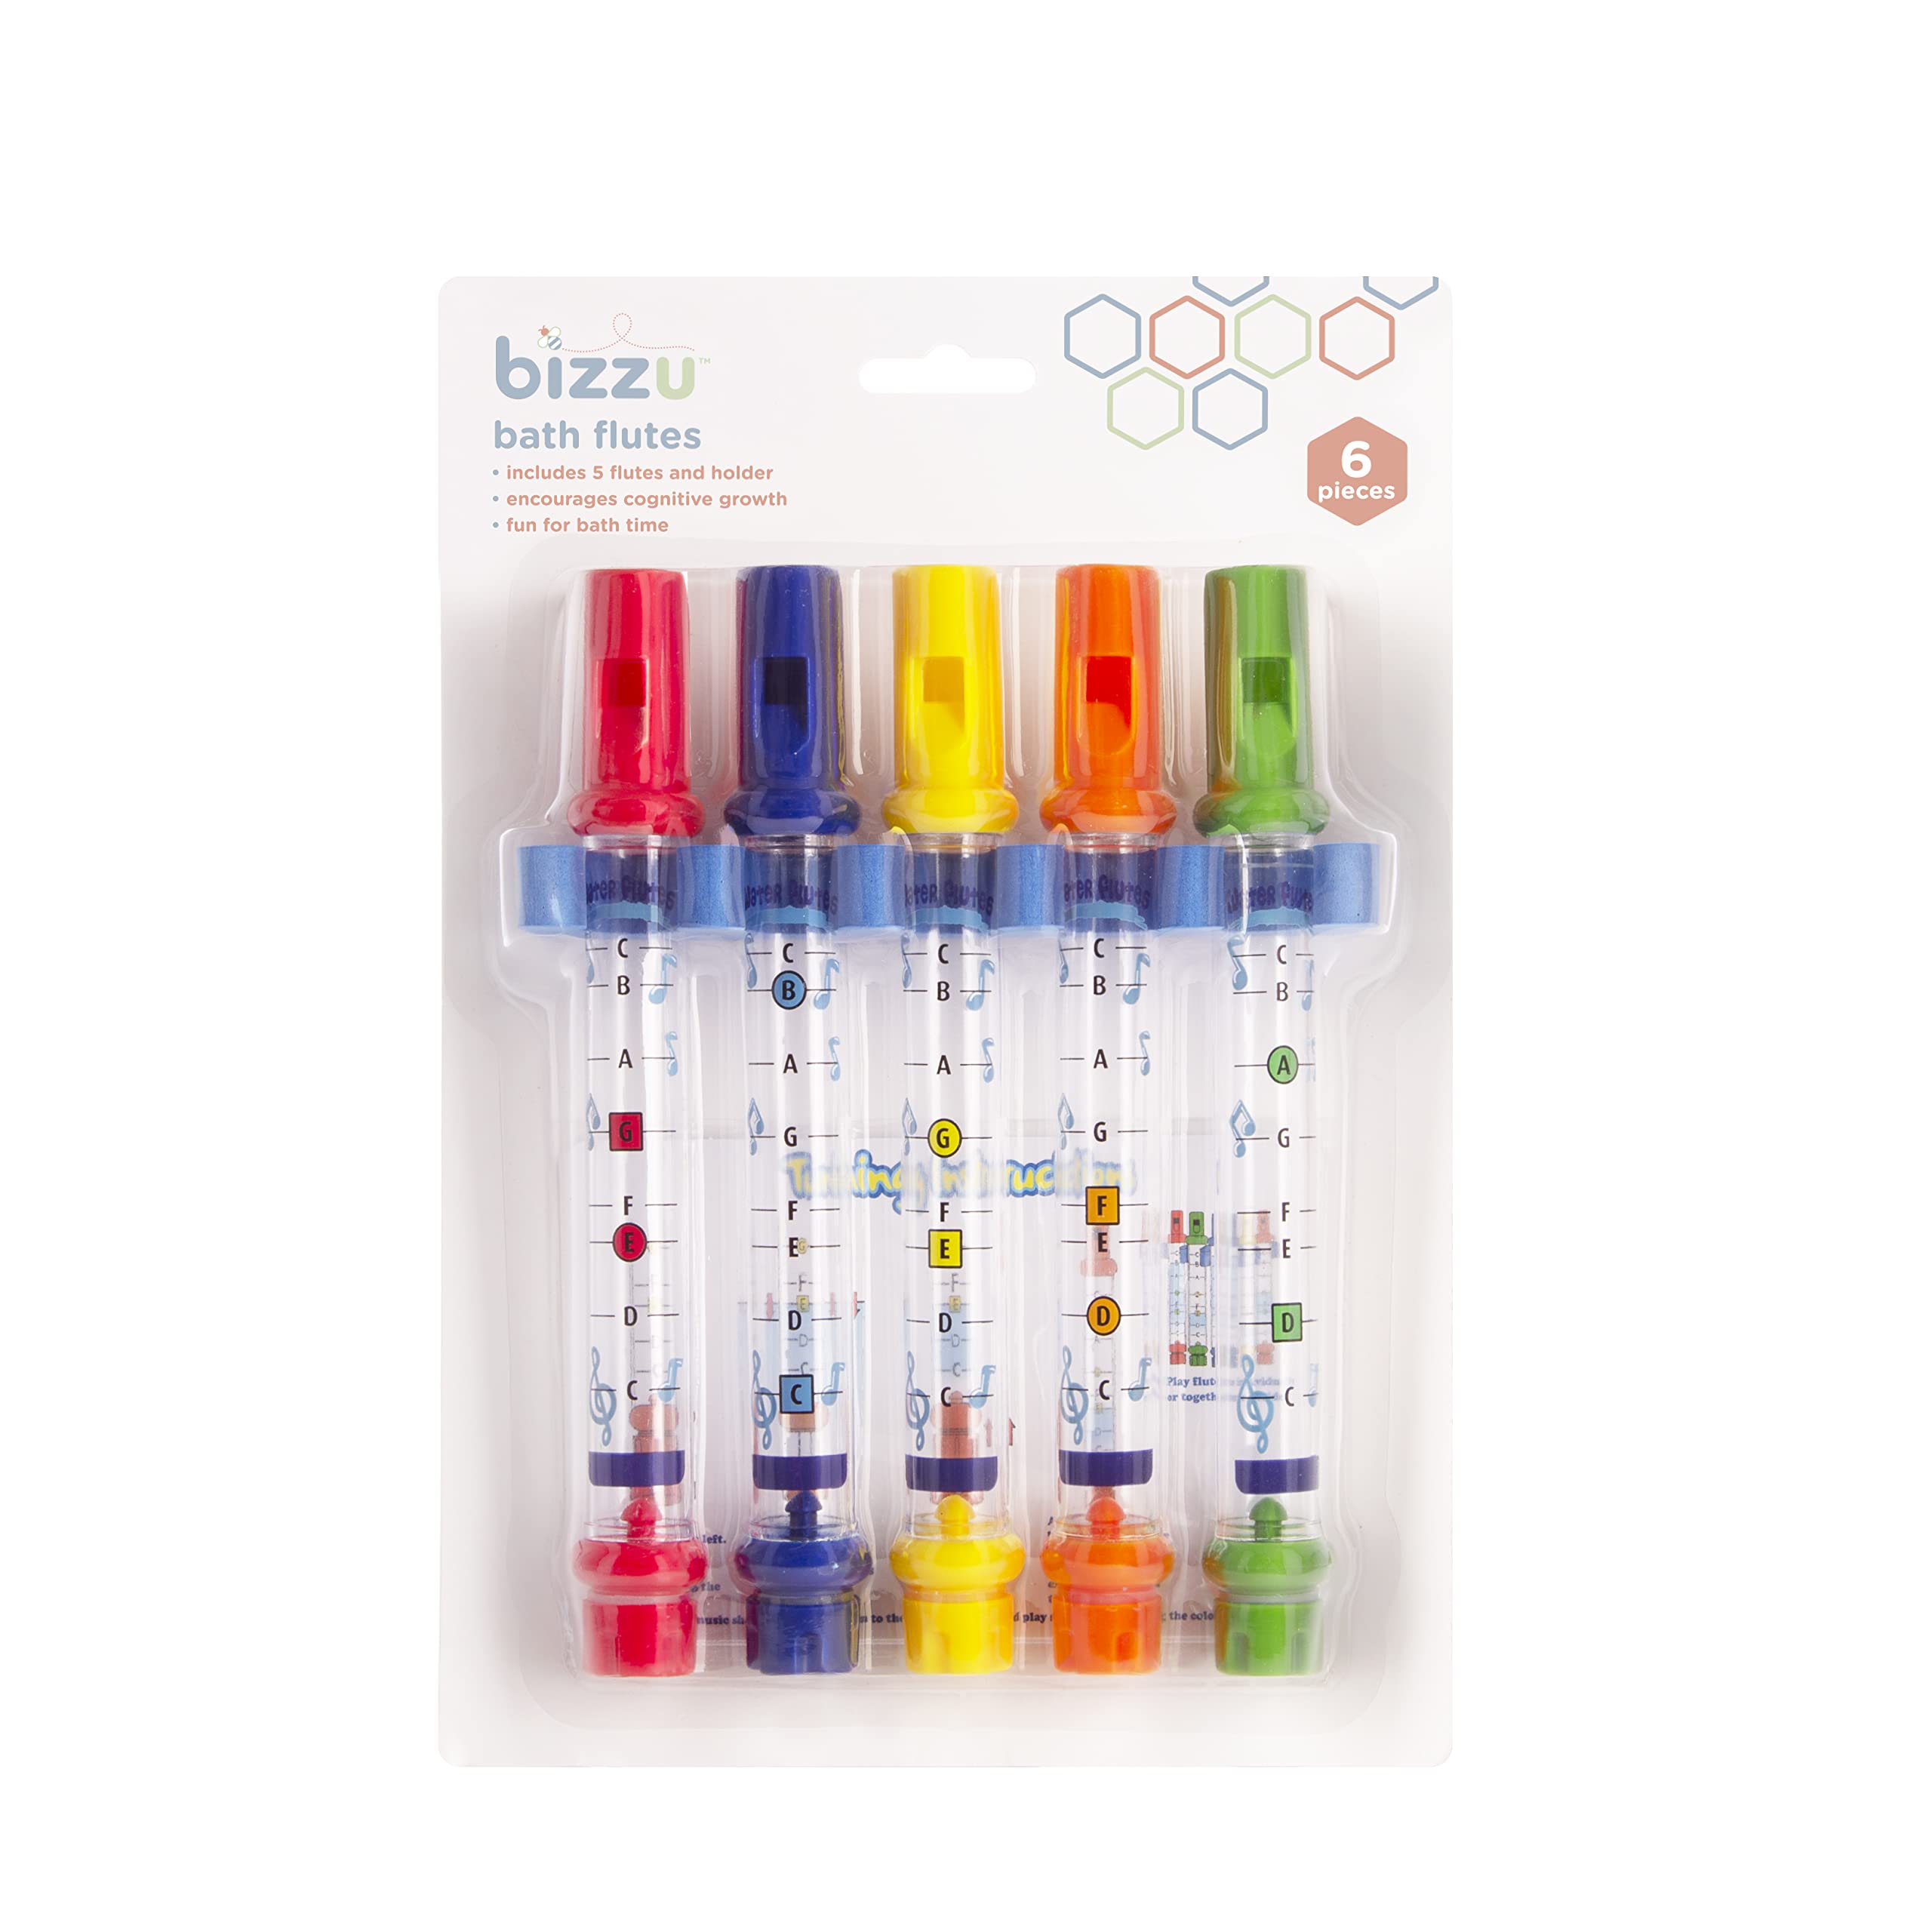 Bizzu Musical Bath Flutes, Toddler Bath Toys, Water Toys for Toddler Bath Time Play